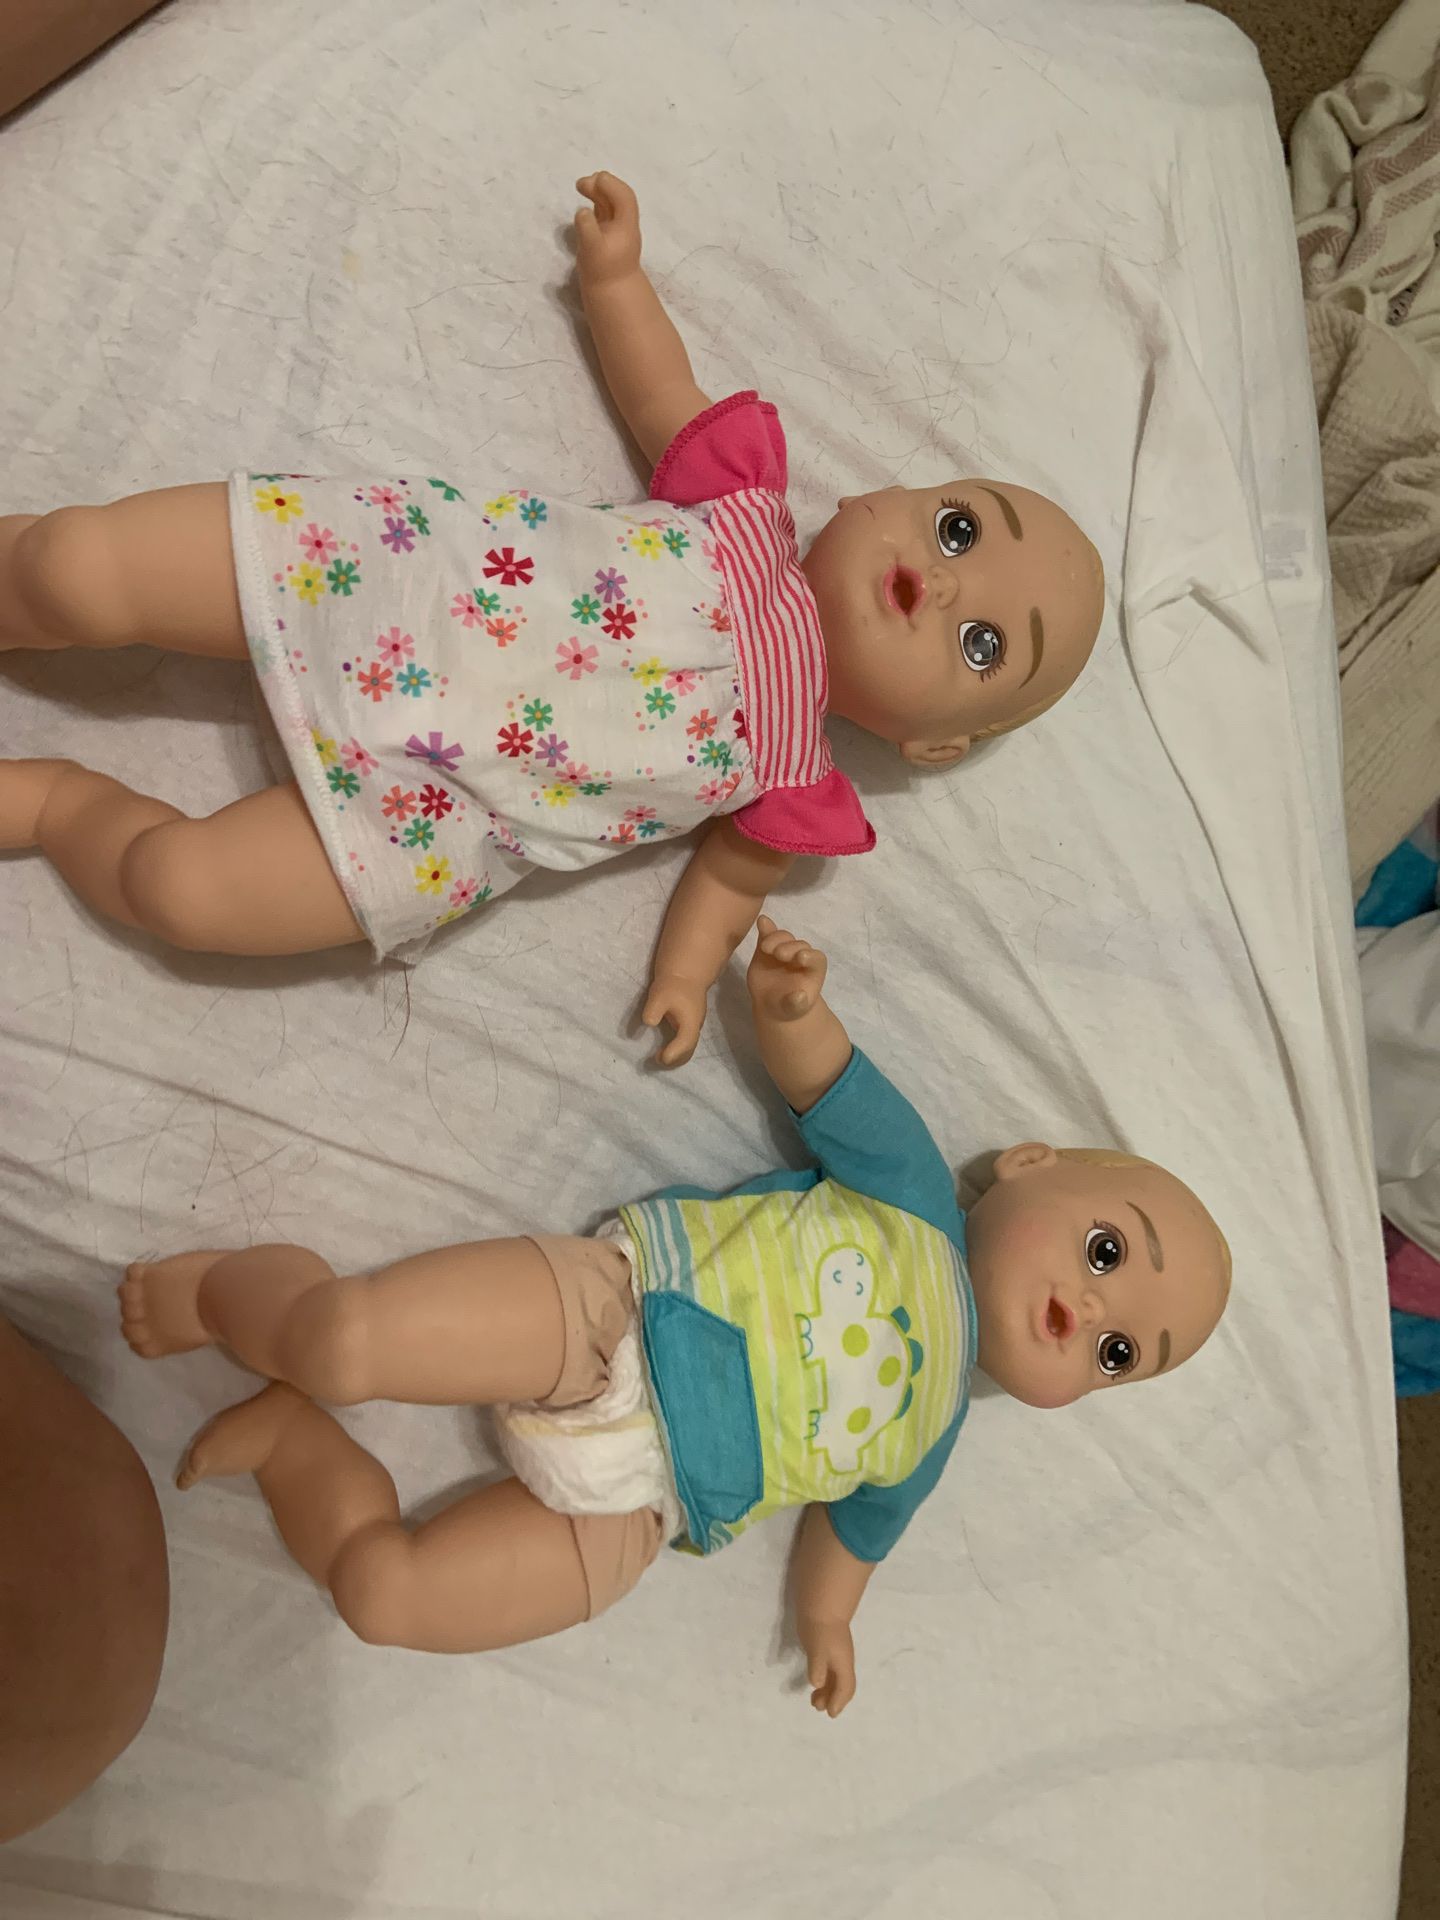 Dolls boy and girl 7 $ for both